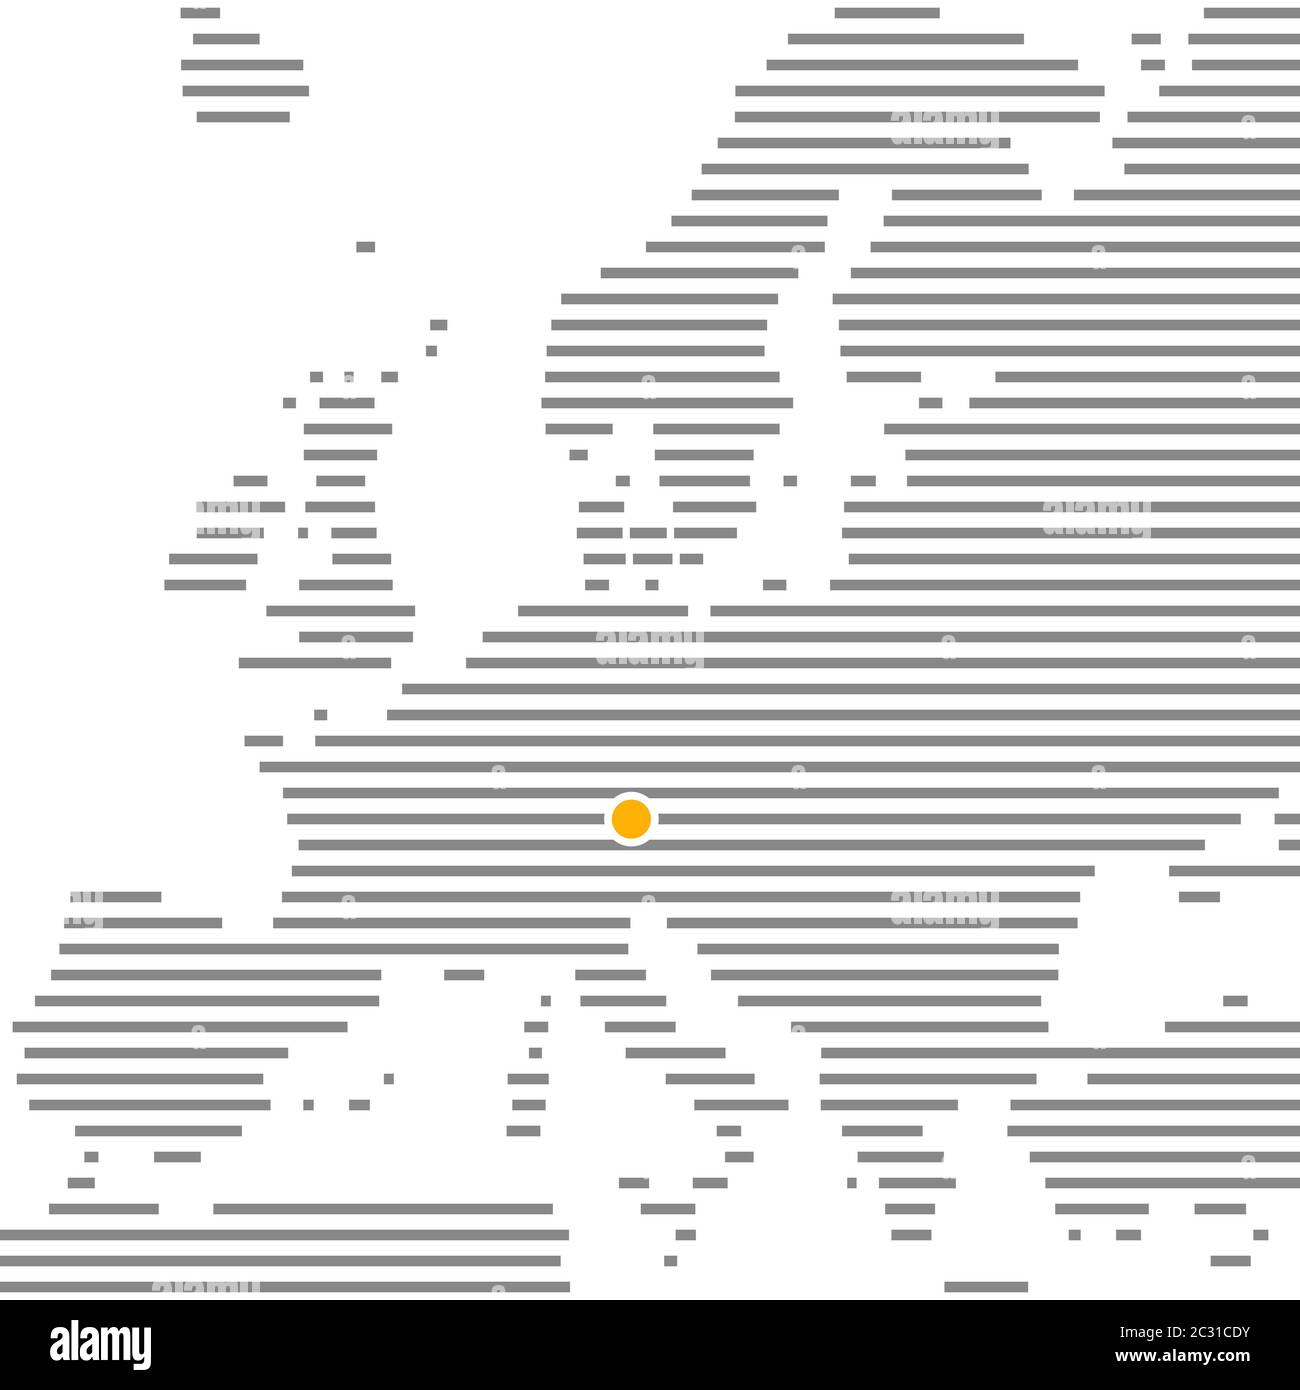 City Munich in Germany on grey striped map of Europe with orange dot Stock Photo